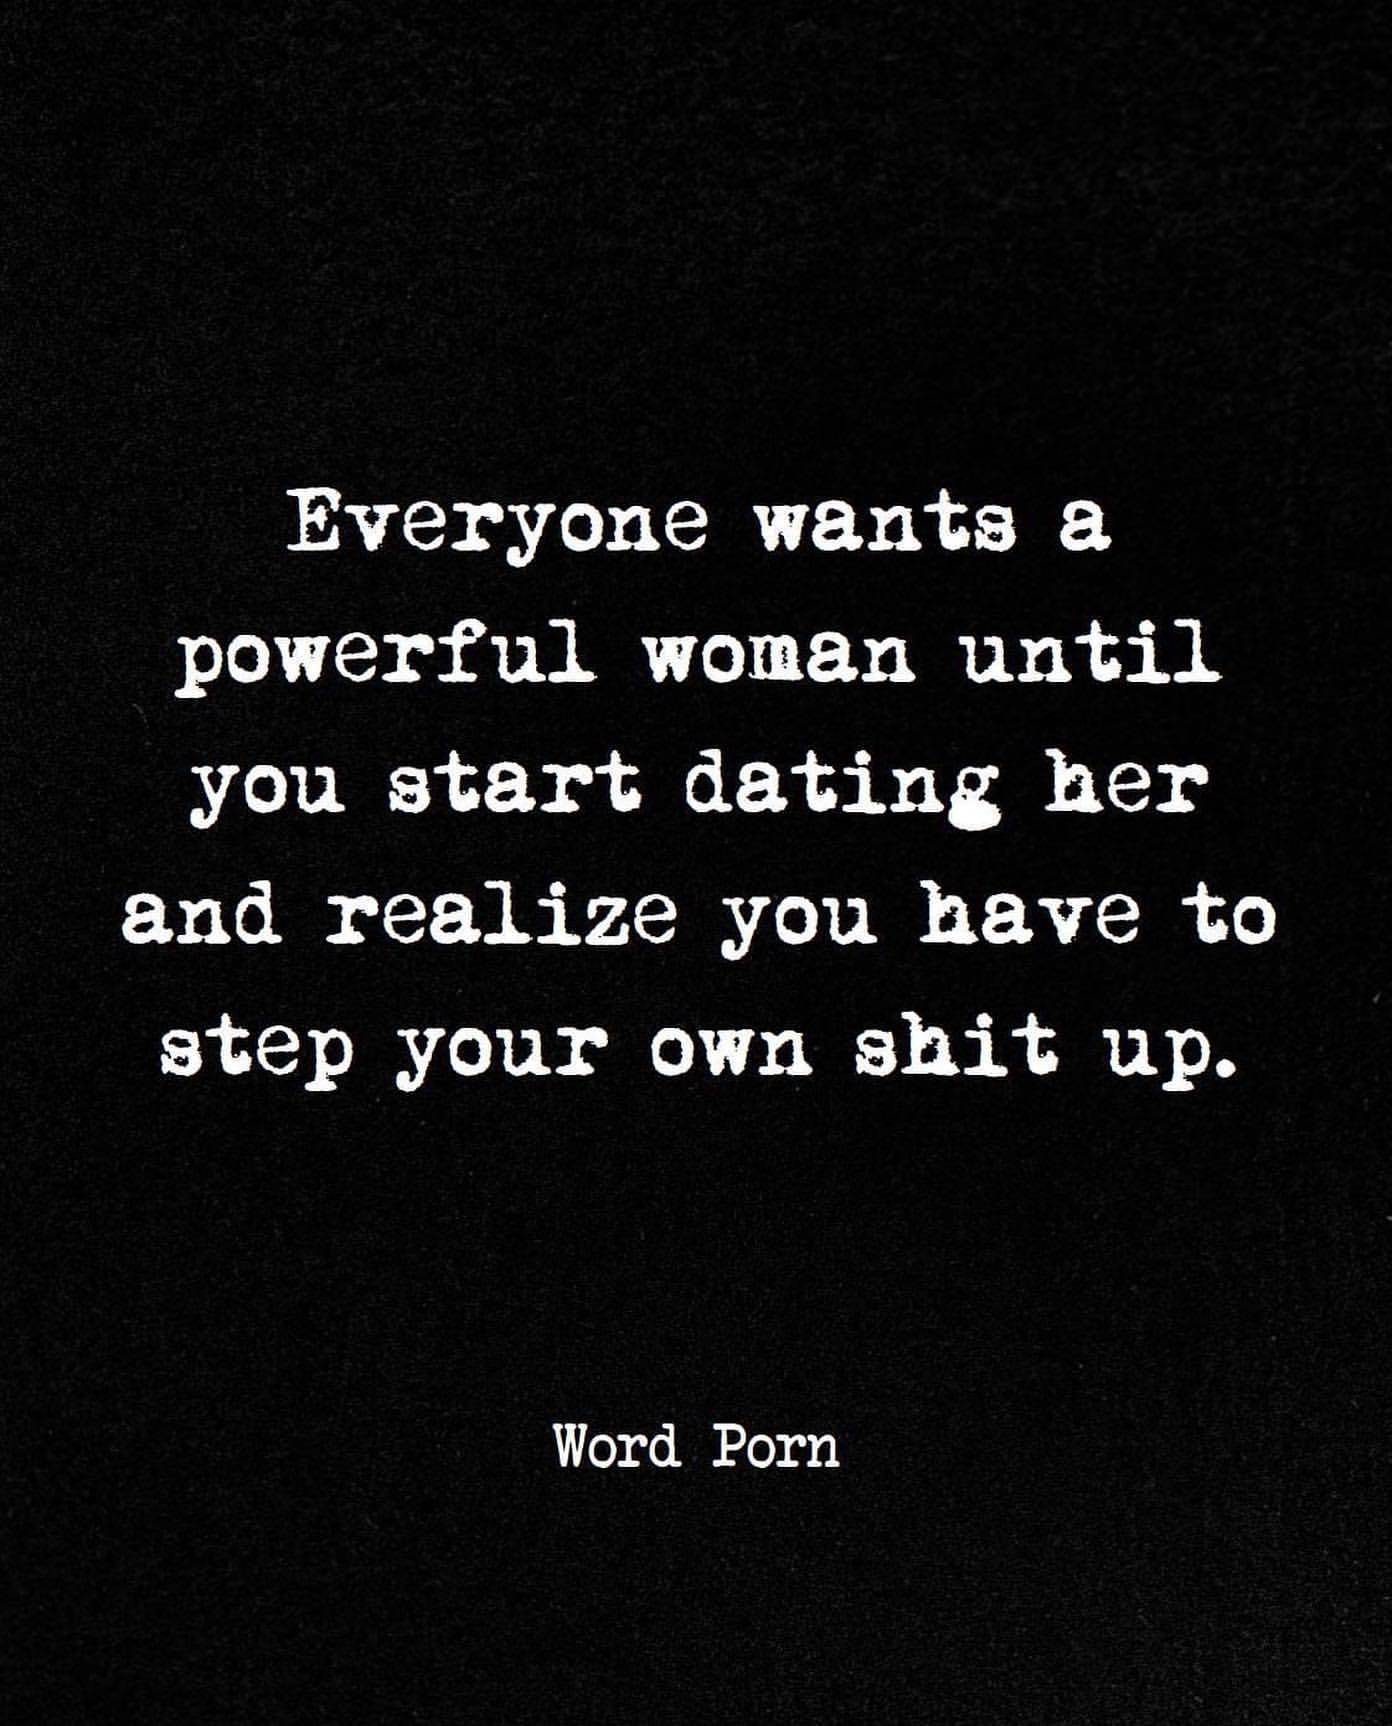 Everyone wants a powerful woman until you start dating her and realize you have to step your own shit up.